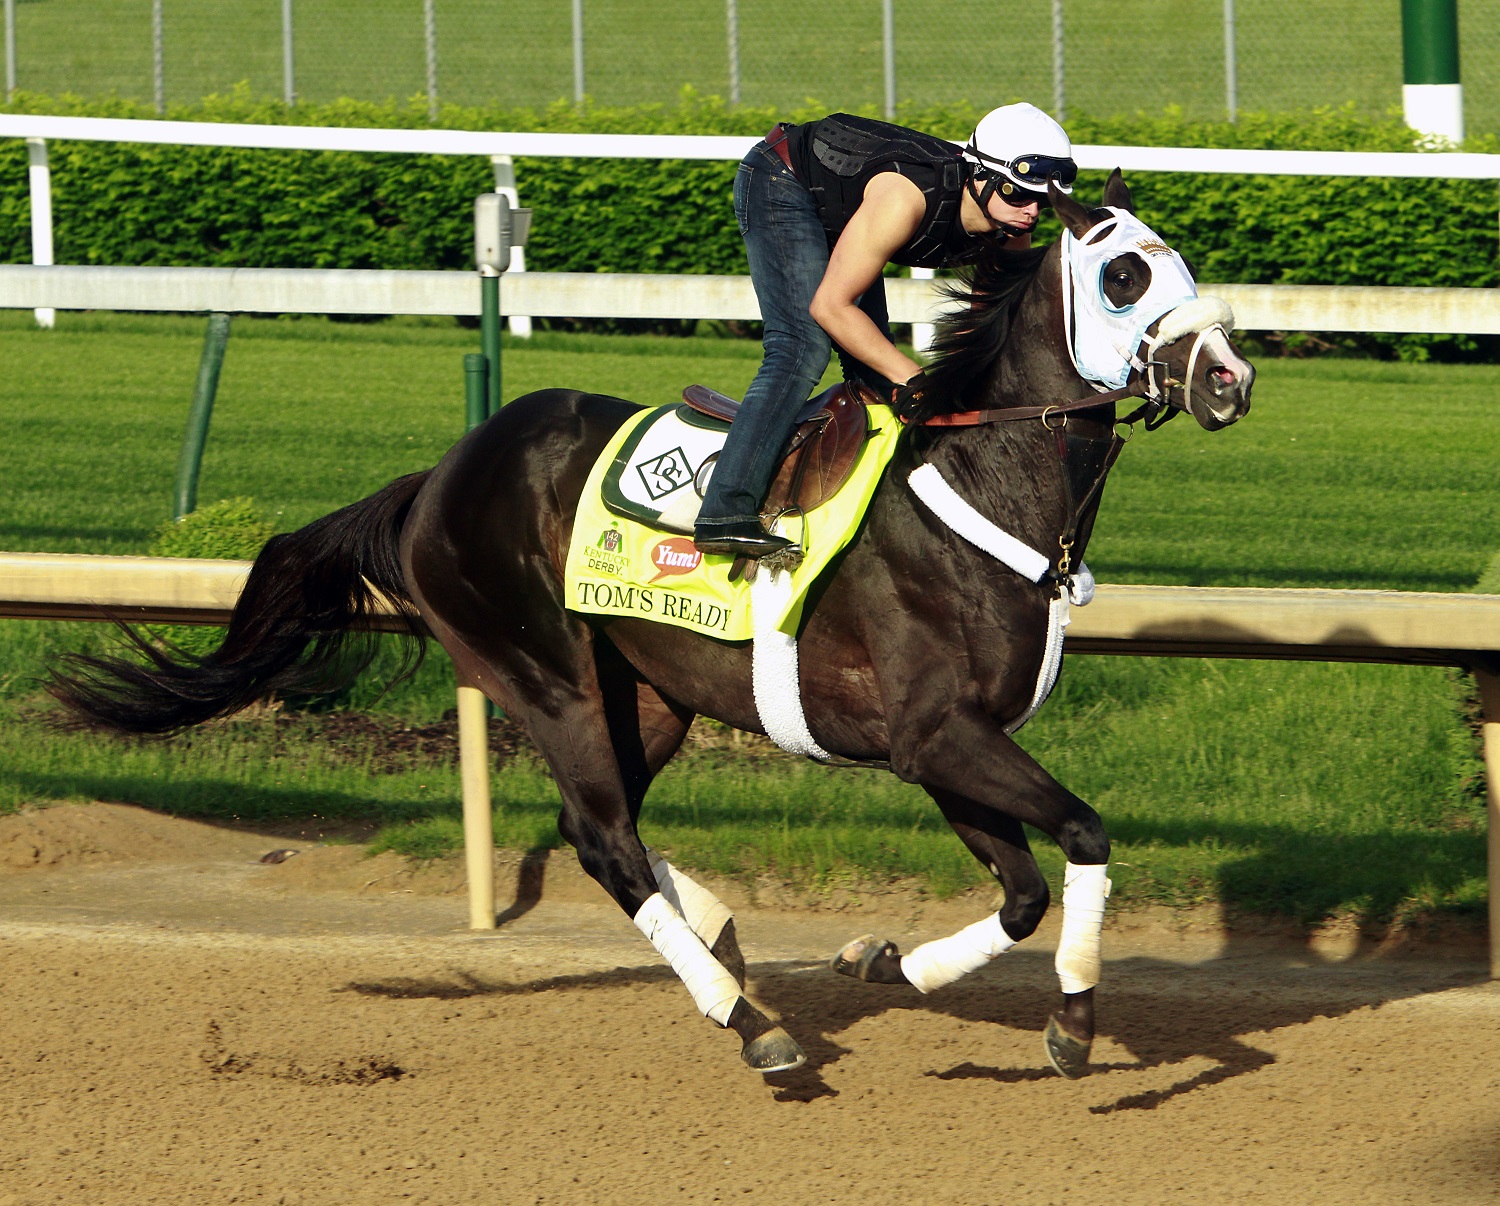 Kentucky Derby hopeful Tom's Ready, ridden by exercise rider Emerson Chavez, gallops at Churchill Downs in Louisville, Ky., Monday, May 2, 2016. The 142nd Kentucky Derby is Saturday, May 7. (AP Photo/Garry Jones)